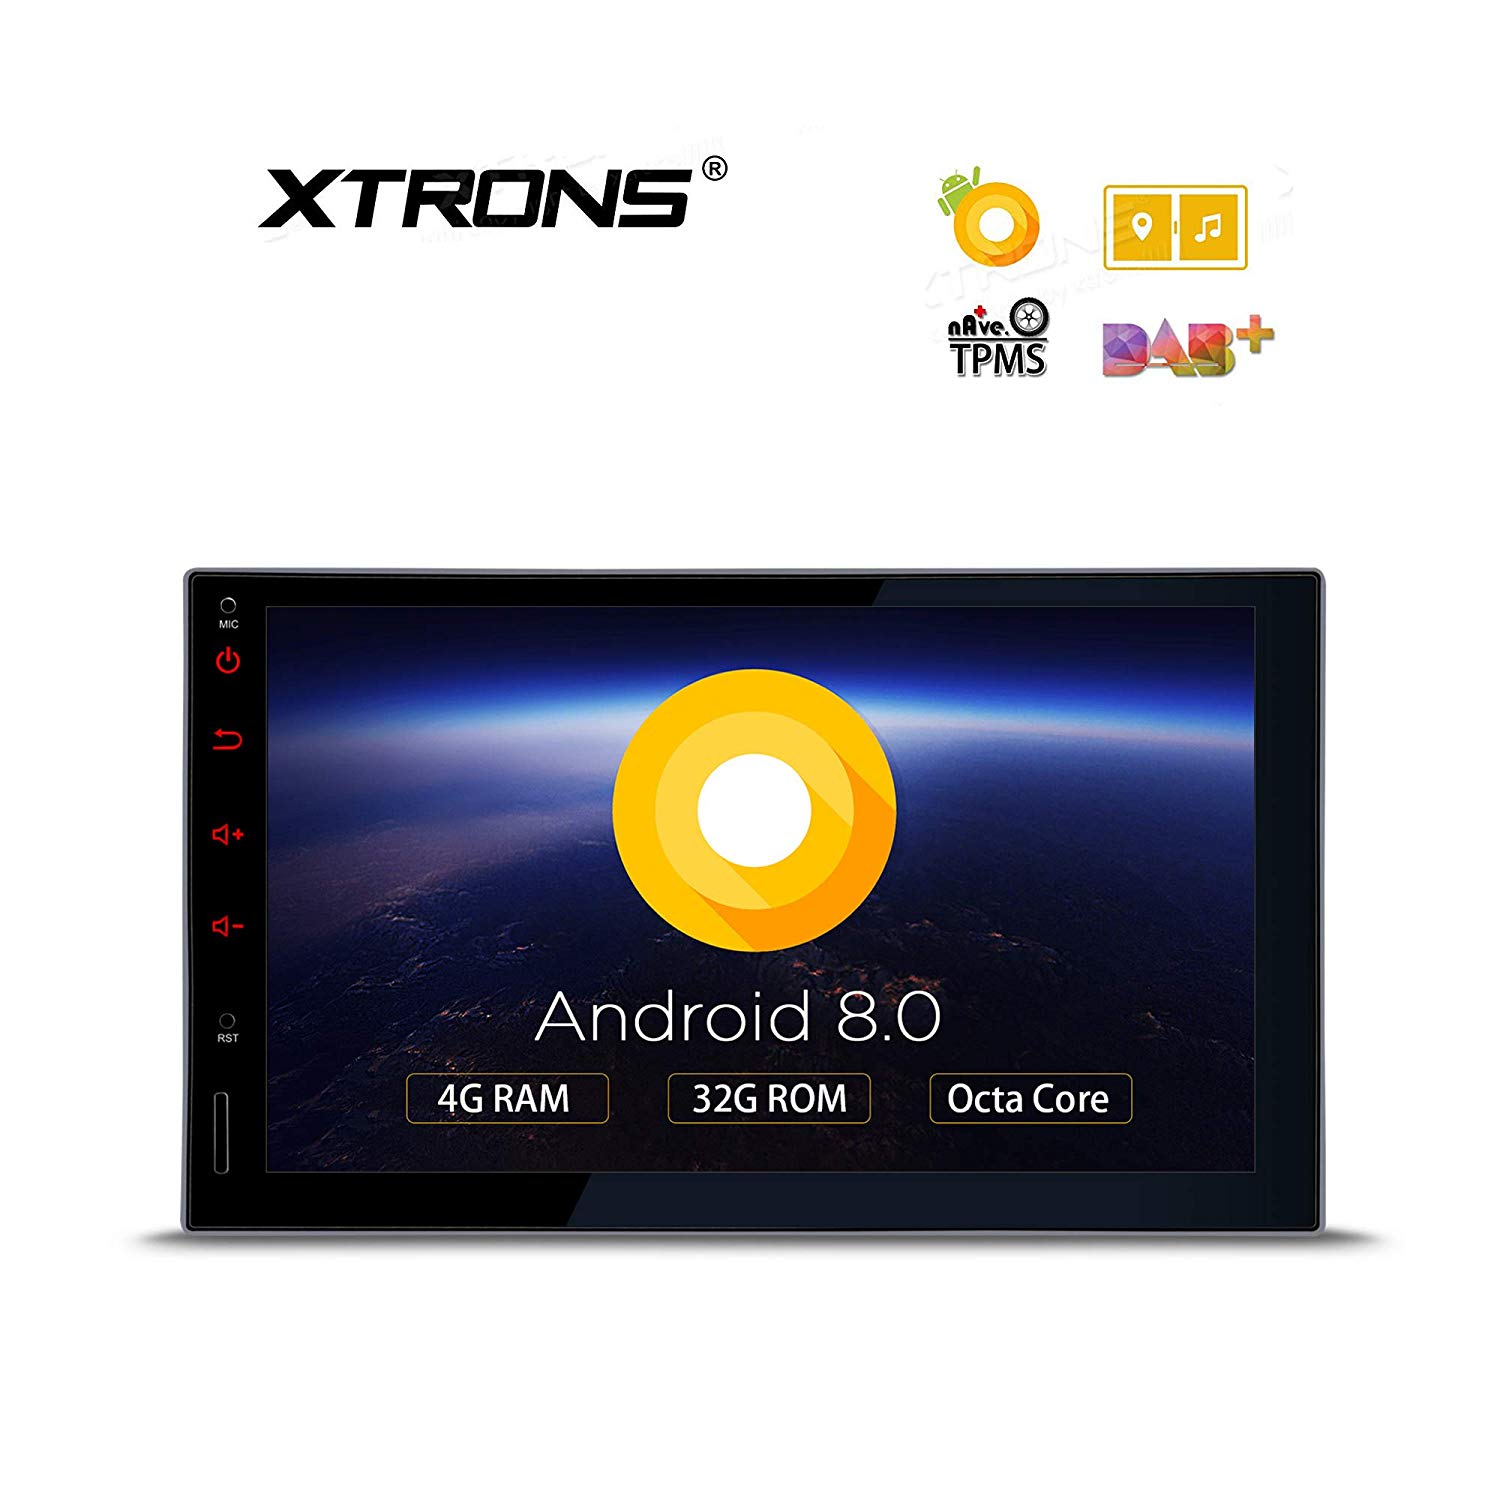 XTRONS 7 Inch Android 8.0 Octa Core 4G RAM 32G ROM HD Digital Multi-Touch Screen Car Stereo GPS Radio OBD2 TPMS Double 2 Din